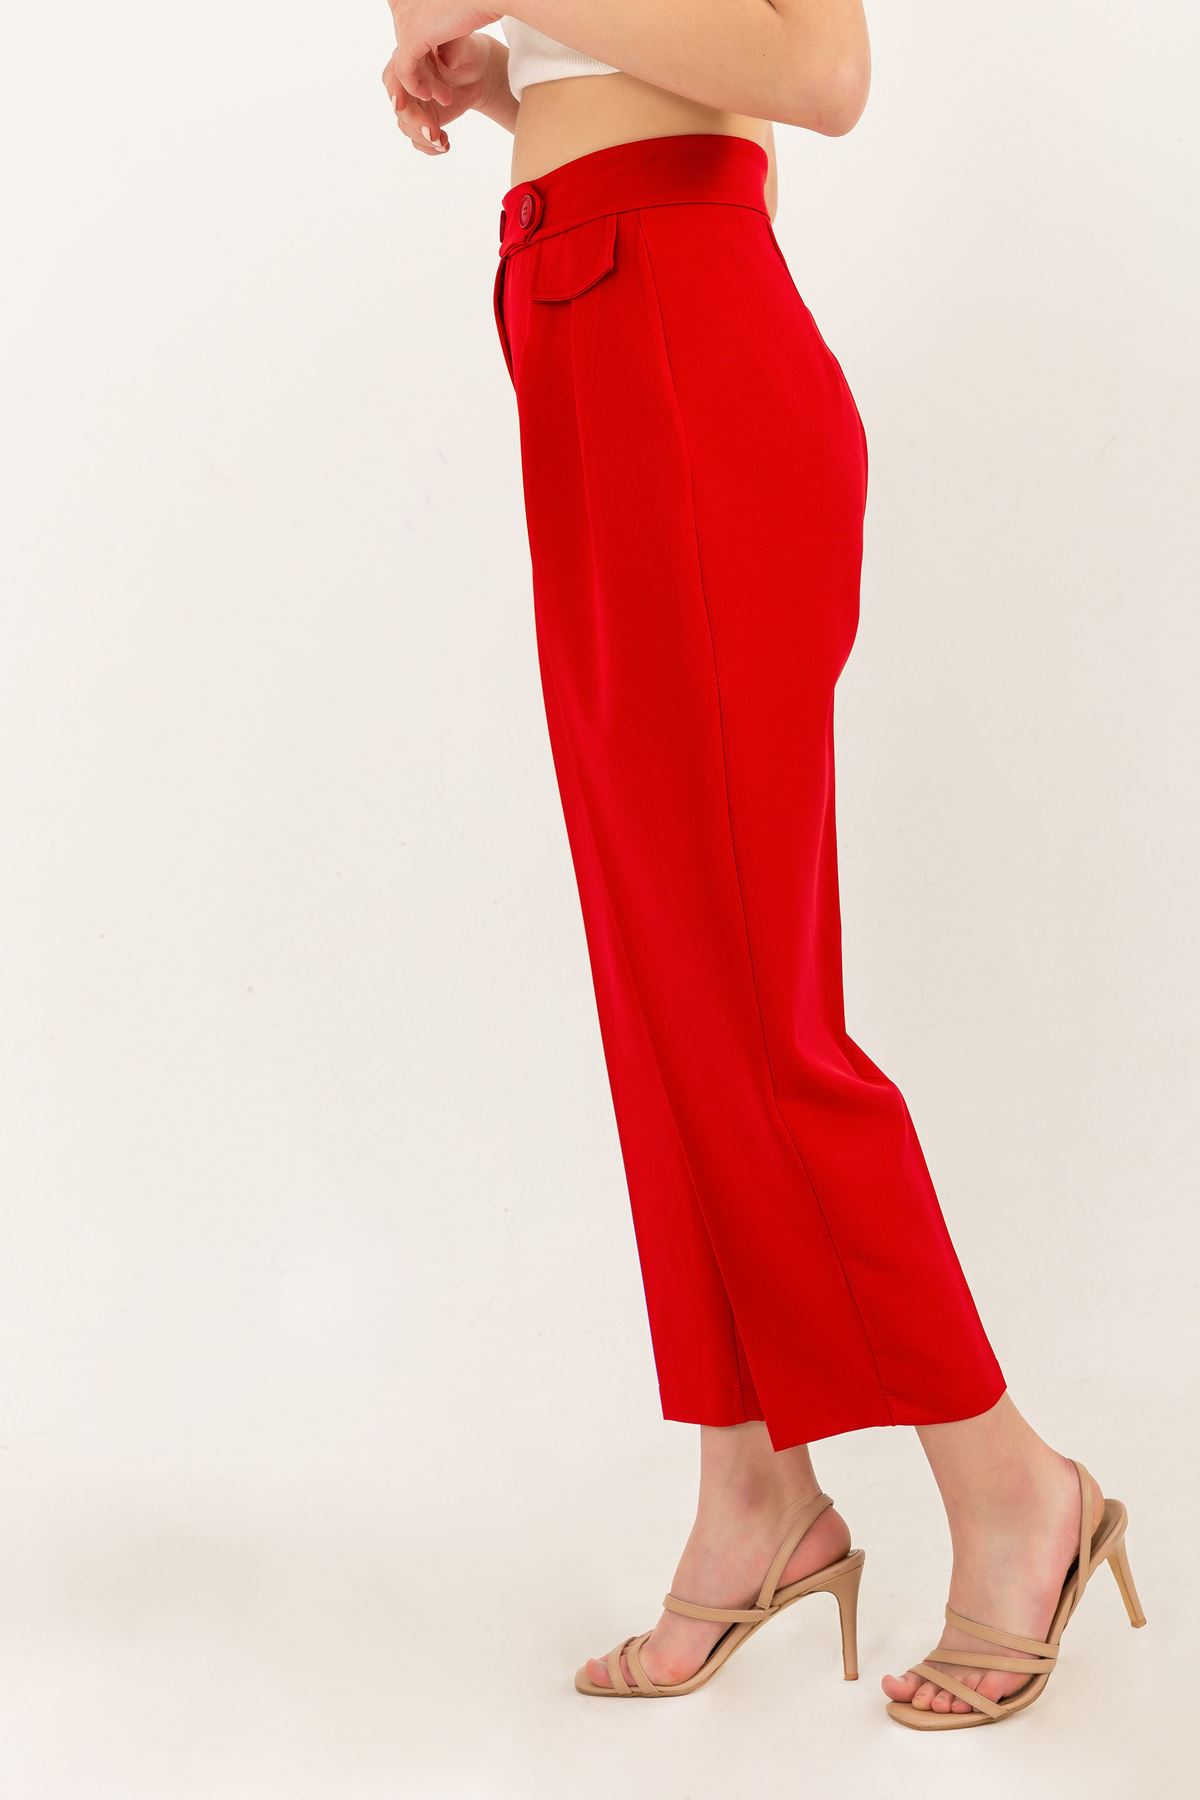 Atlas Fabric Ankle Length Carrot Style Women Trouser-Red